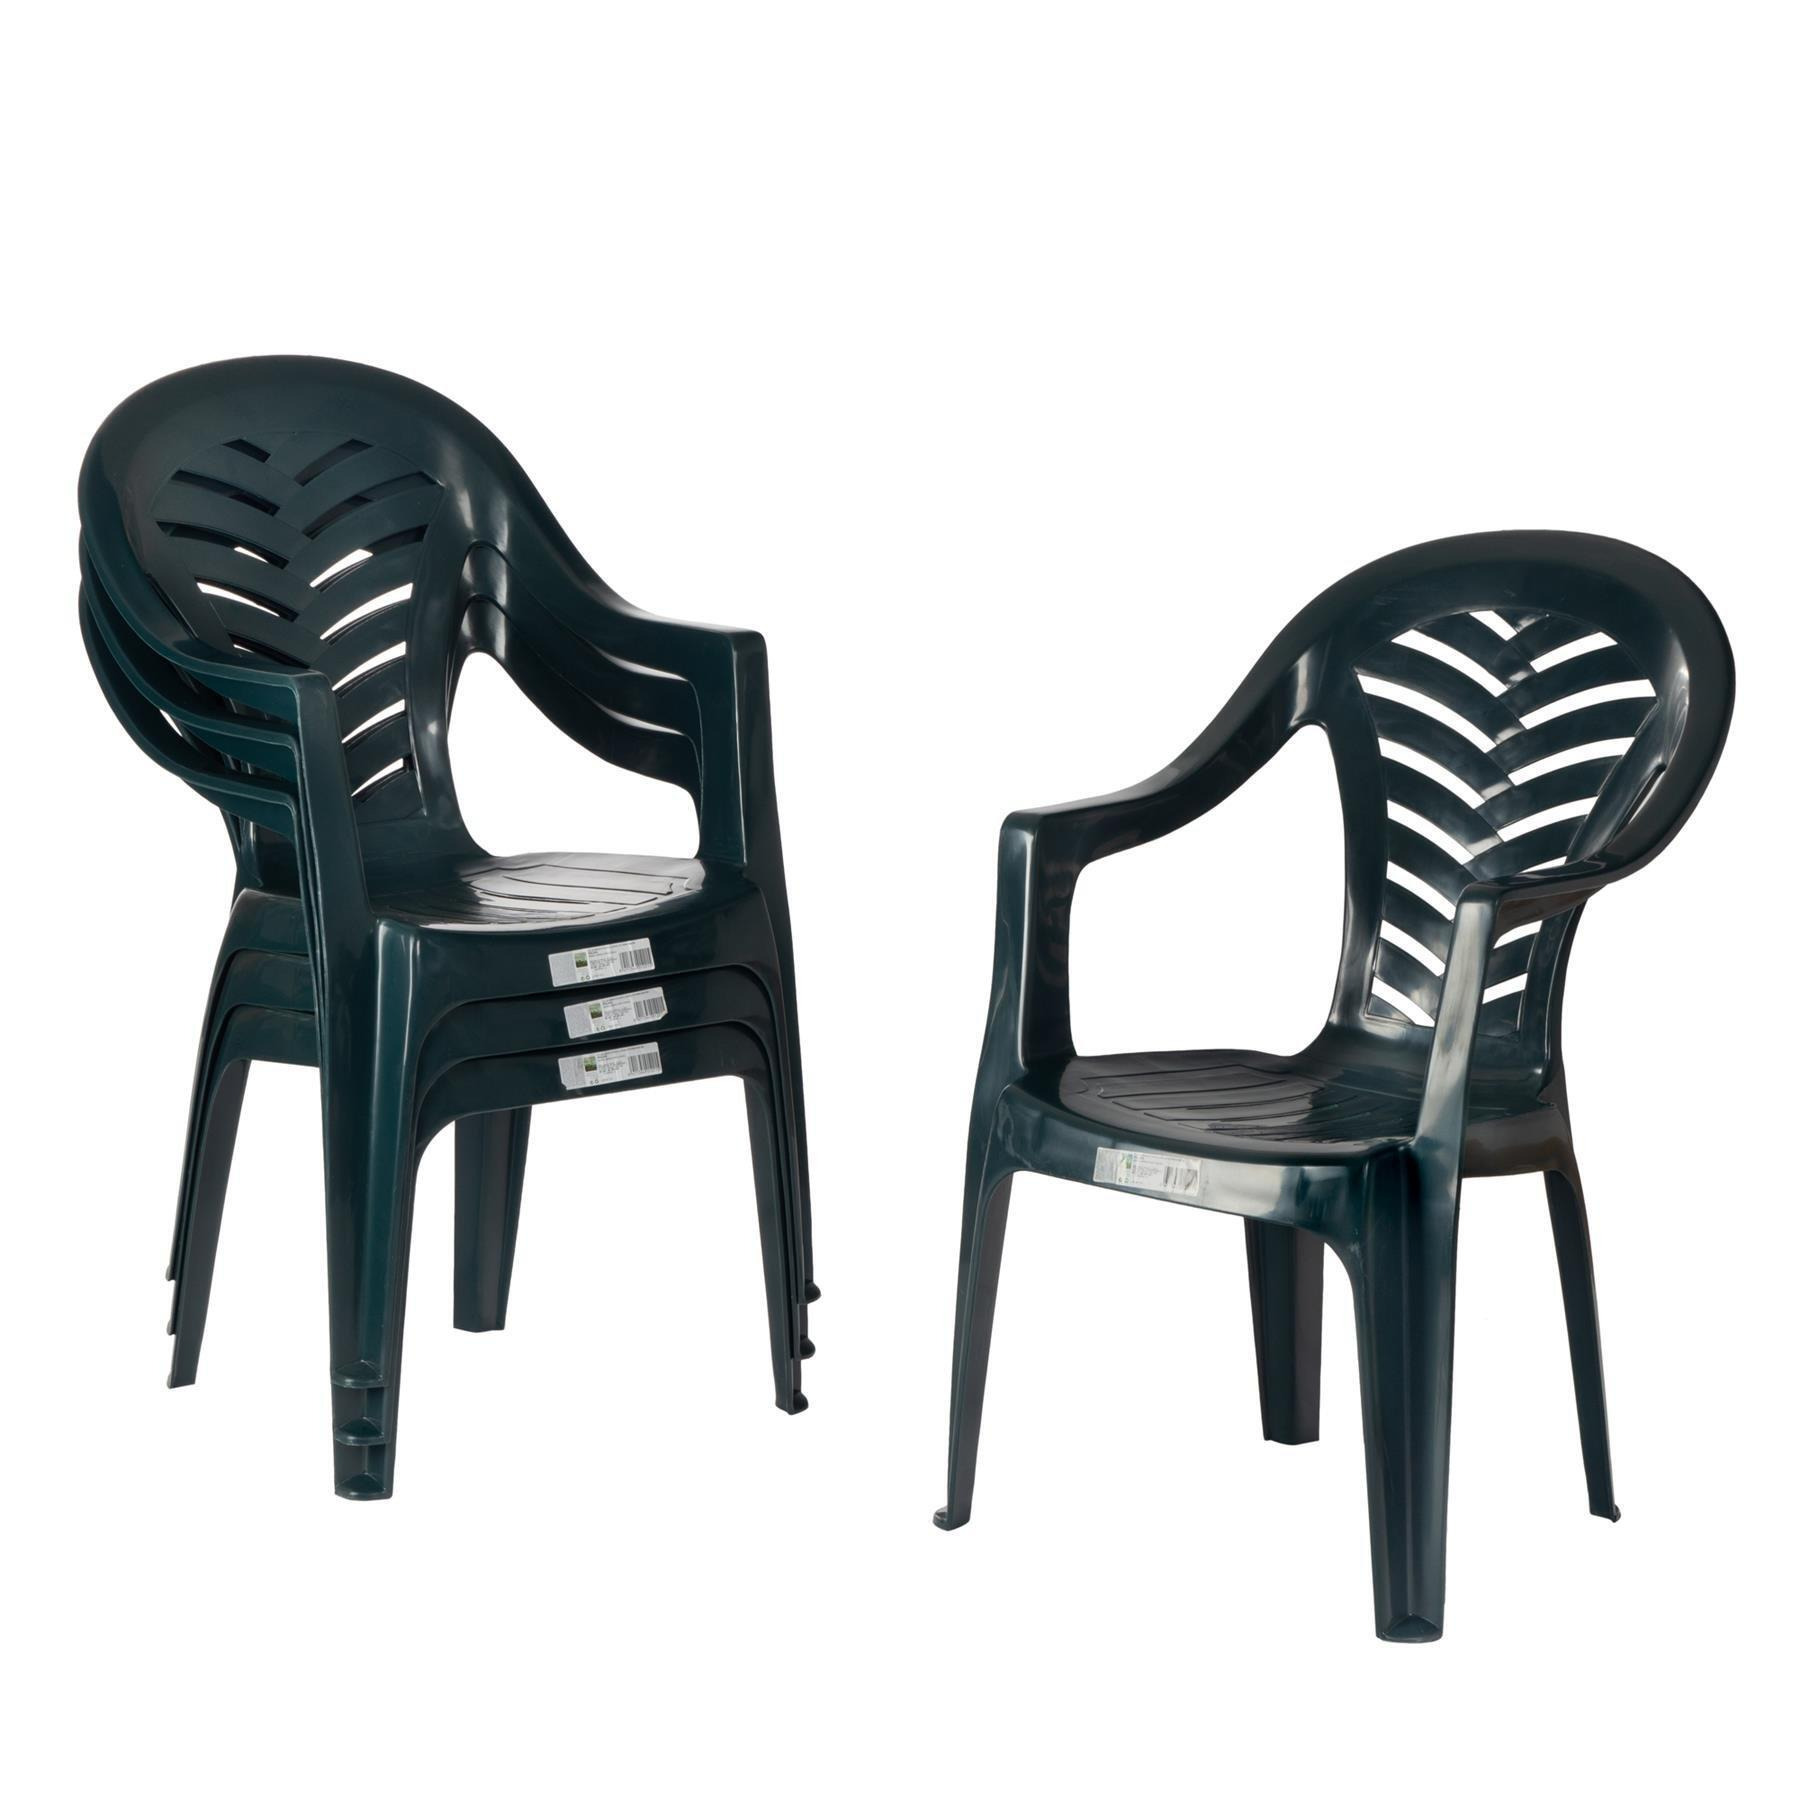 Palma Garden Dining Chairs Pack of 6 - image 1